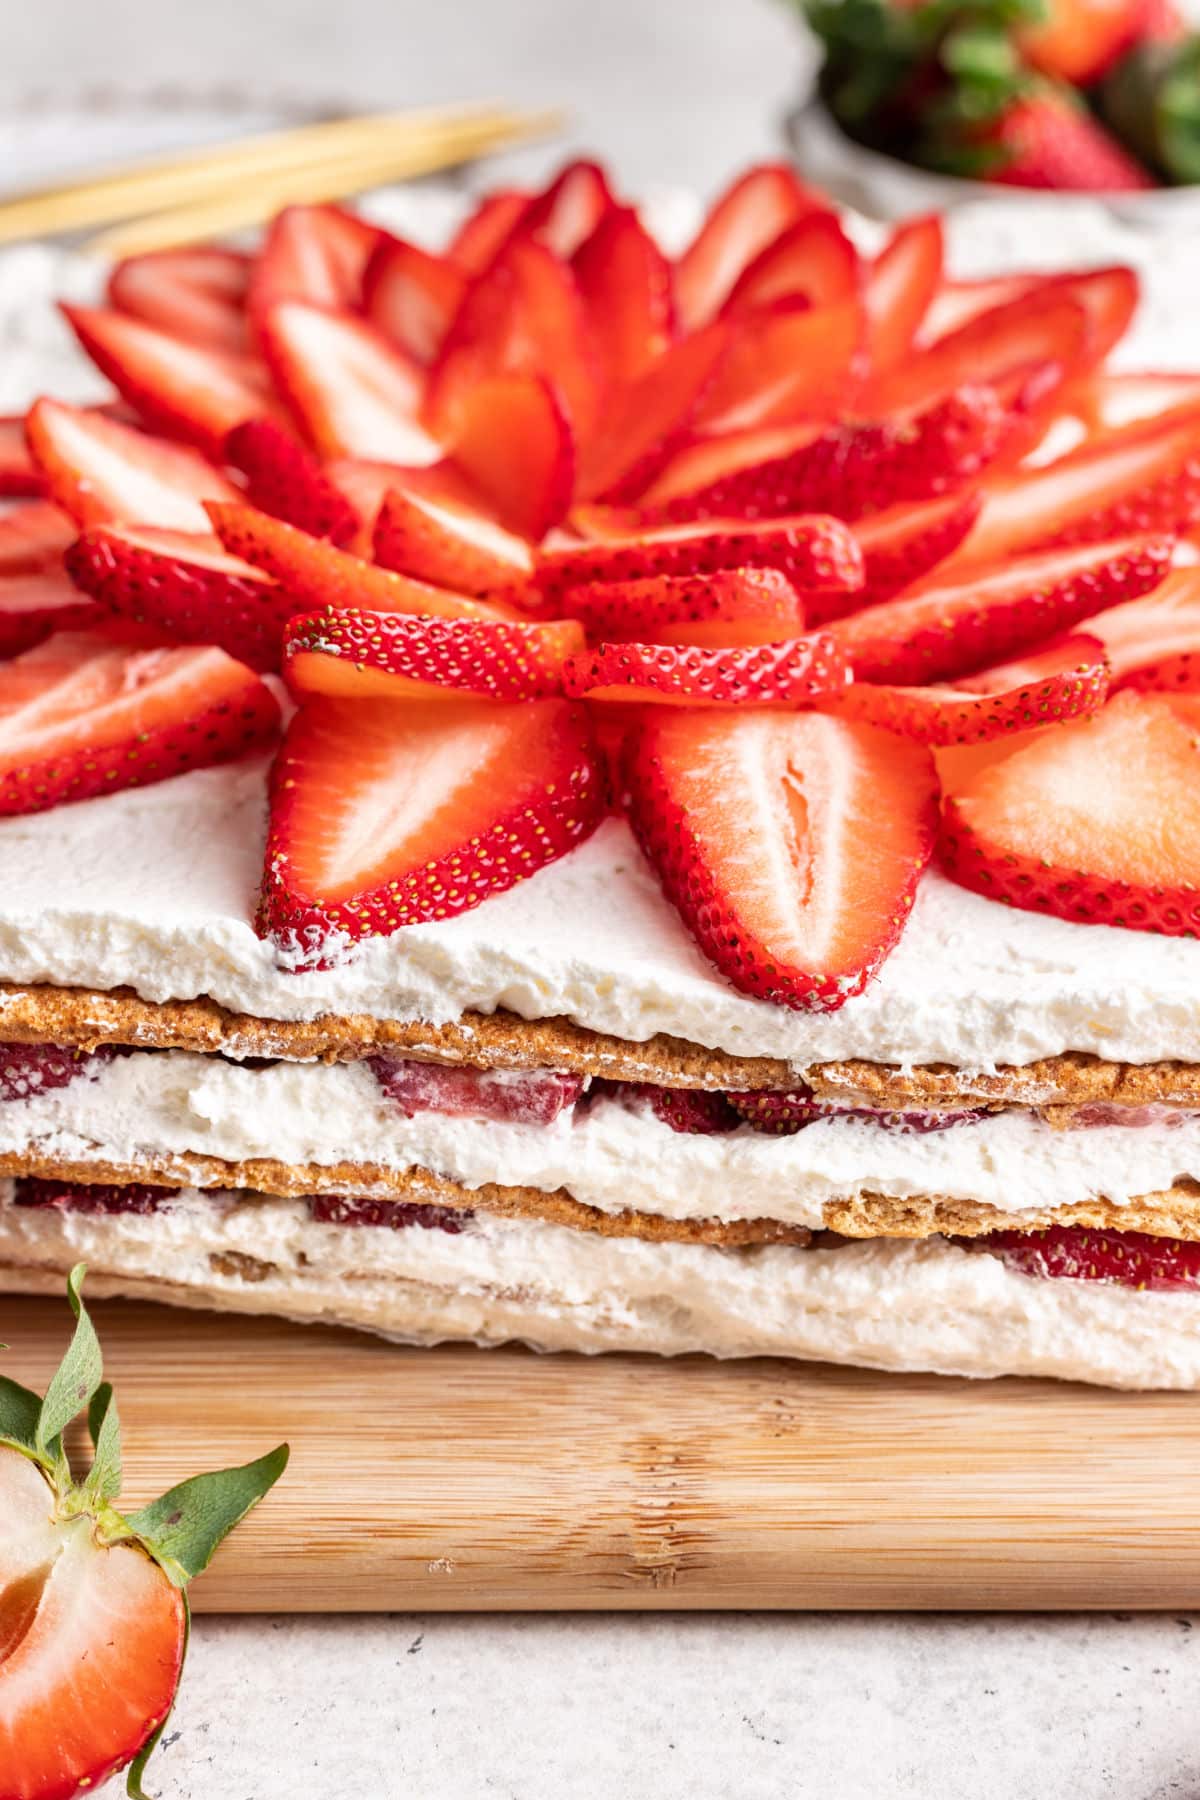 A strawberry icebox cake on a wooden cutting board.